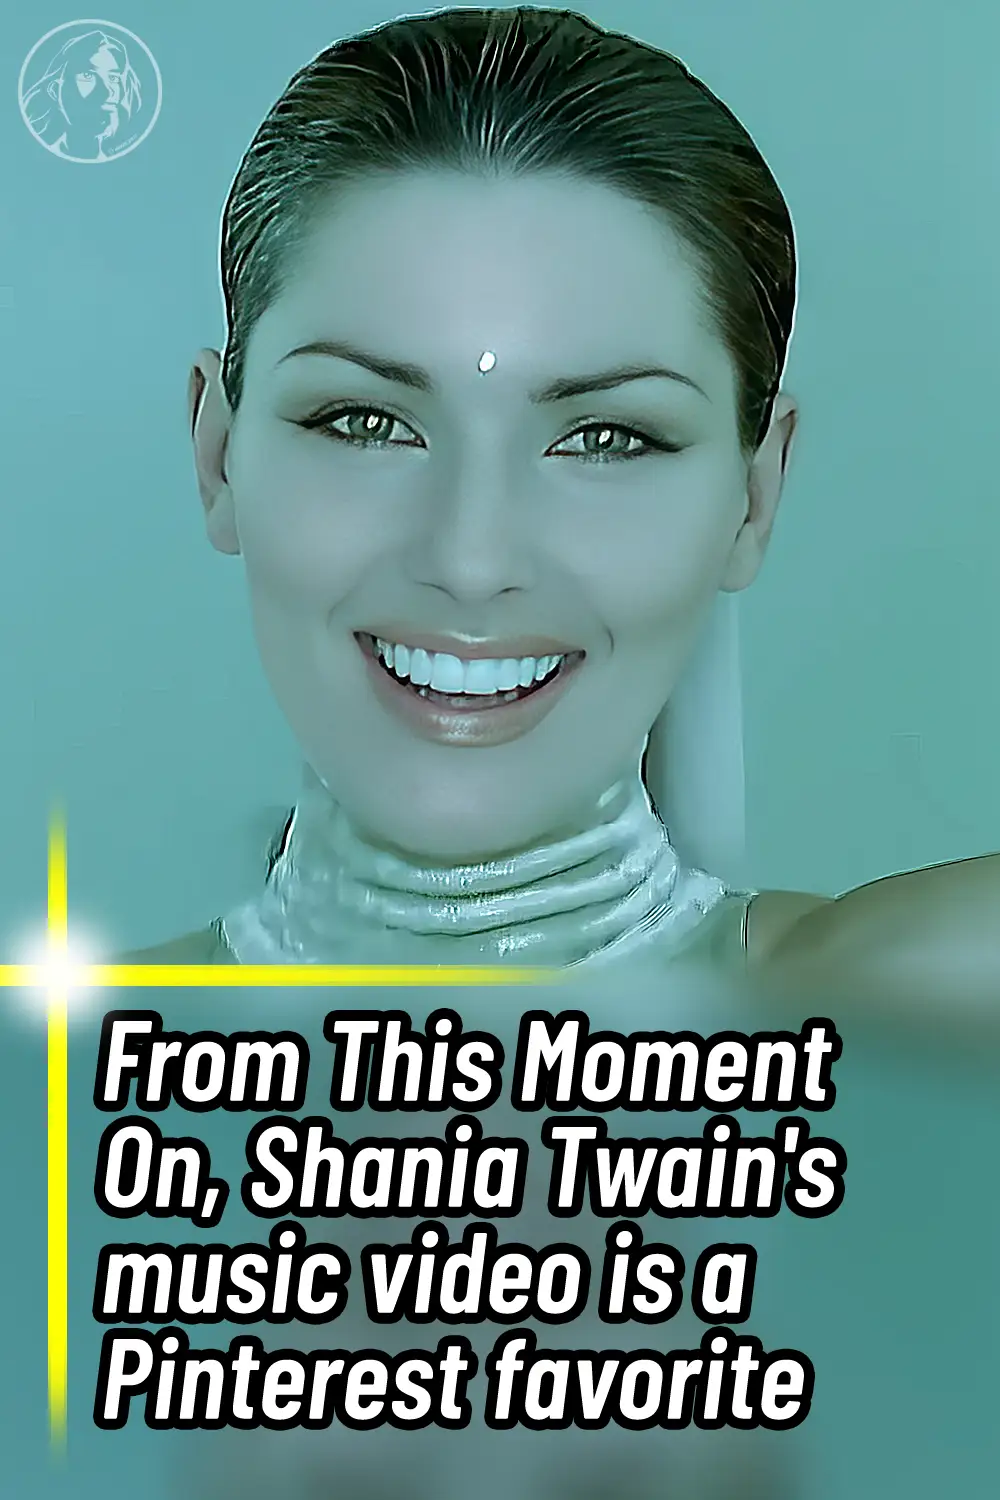 From This Moment On, Shania Twain\'s music video is a Pinterest favorite